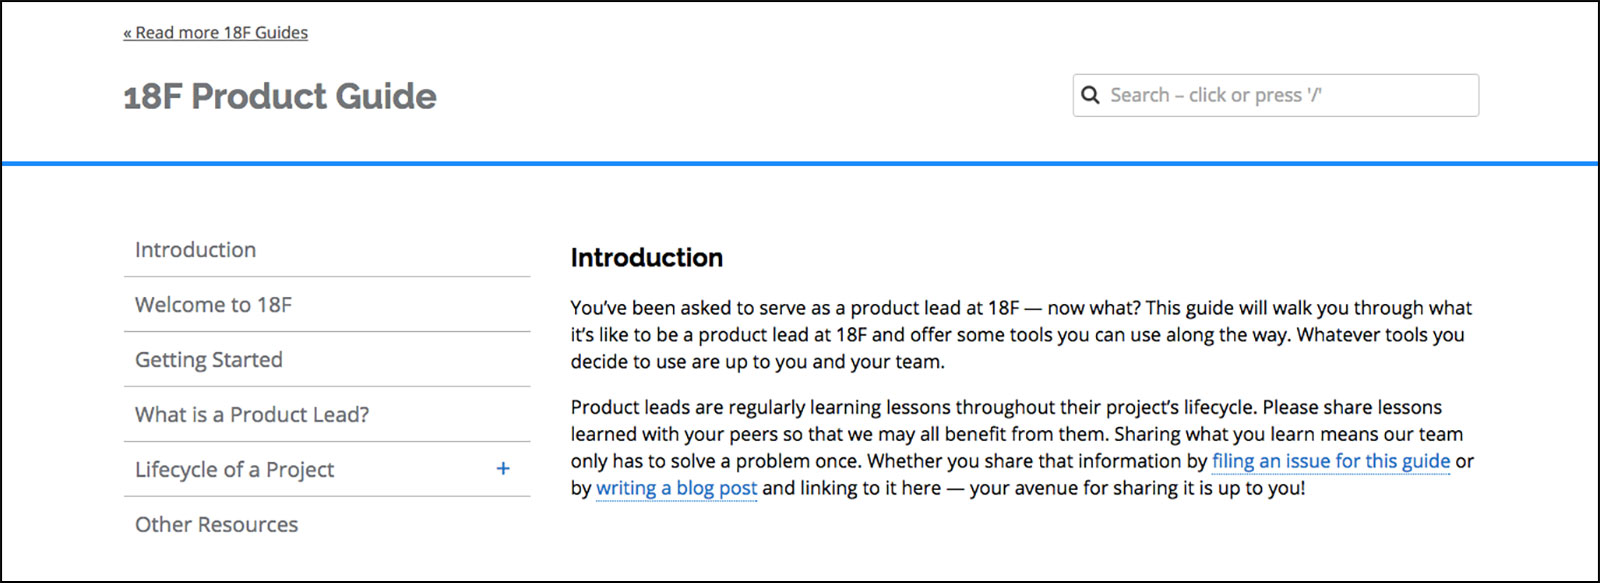 A screenshot of the 18F Product Guide